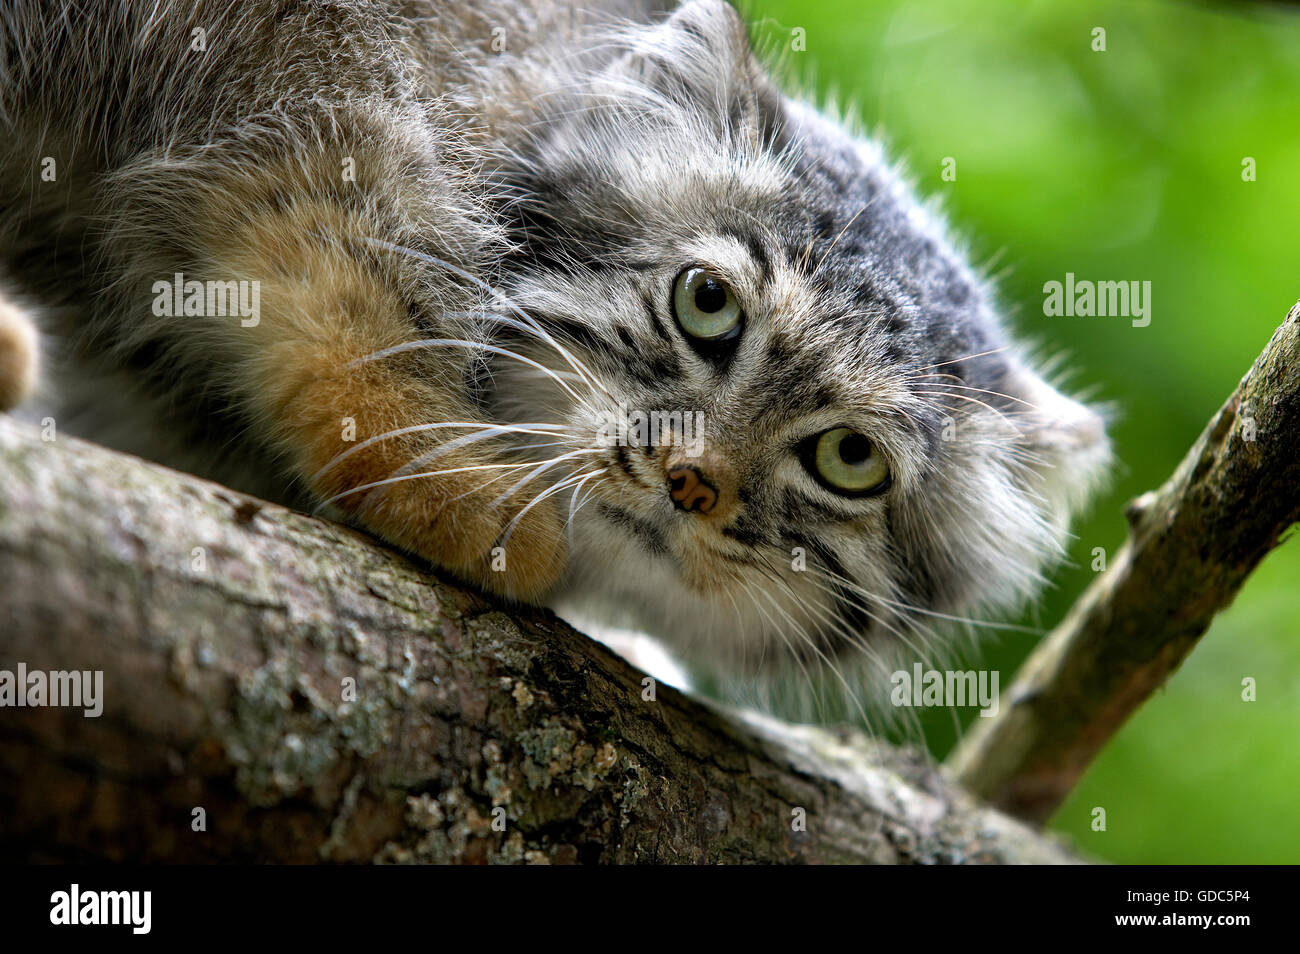 Manul or Pallas's Cat, otocolobus manul, Portrait of Adult Stock Photo